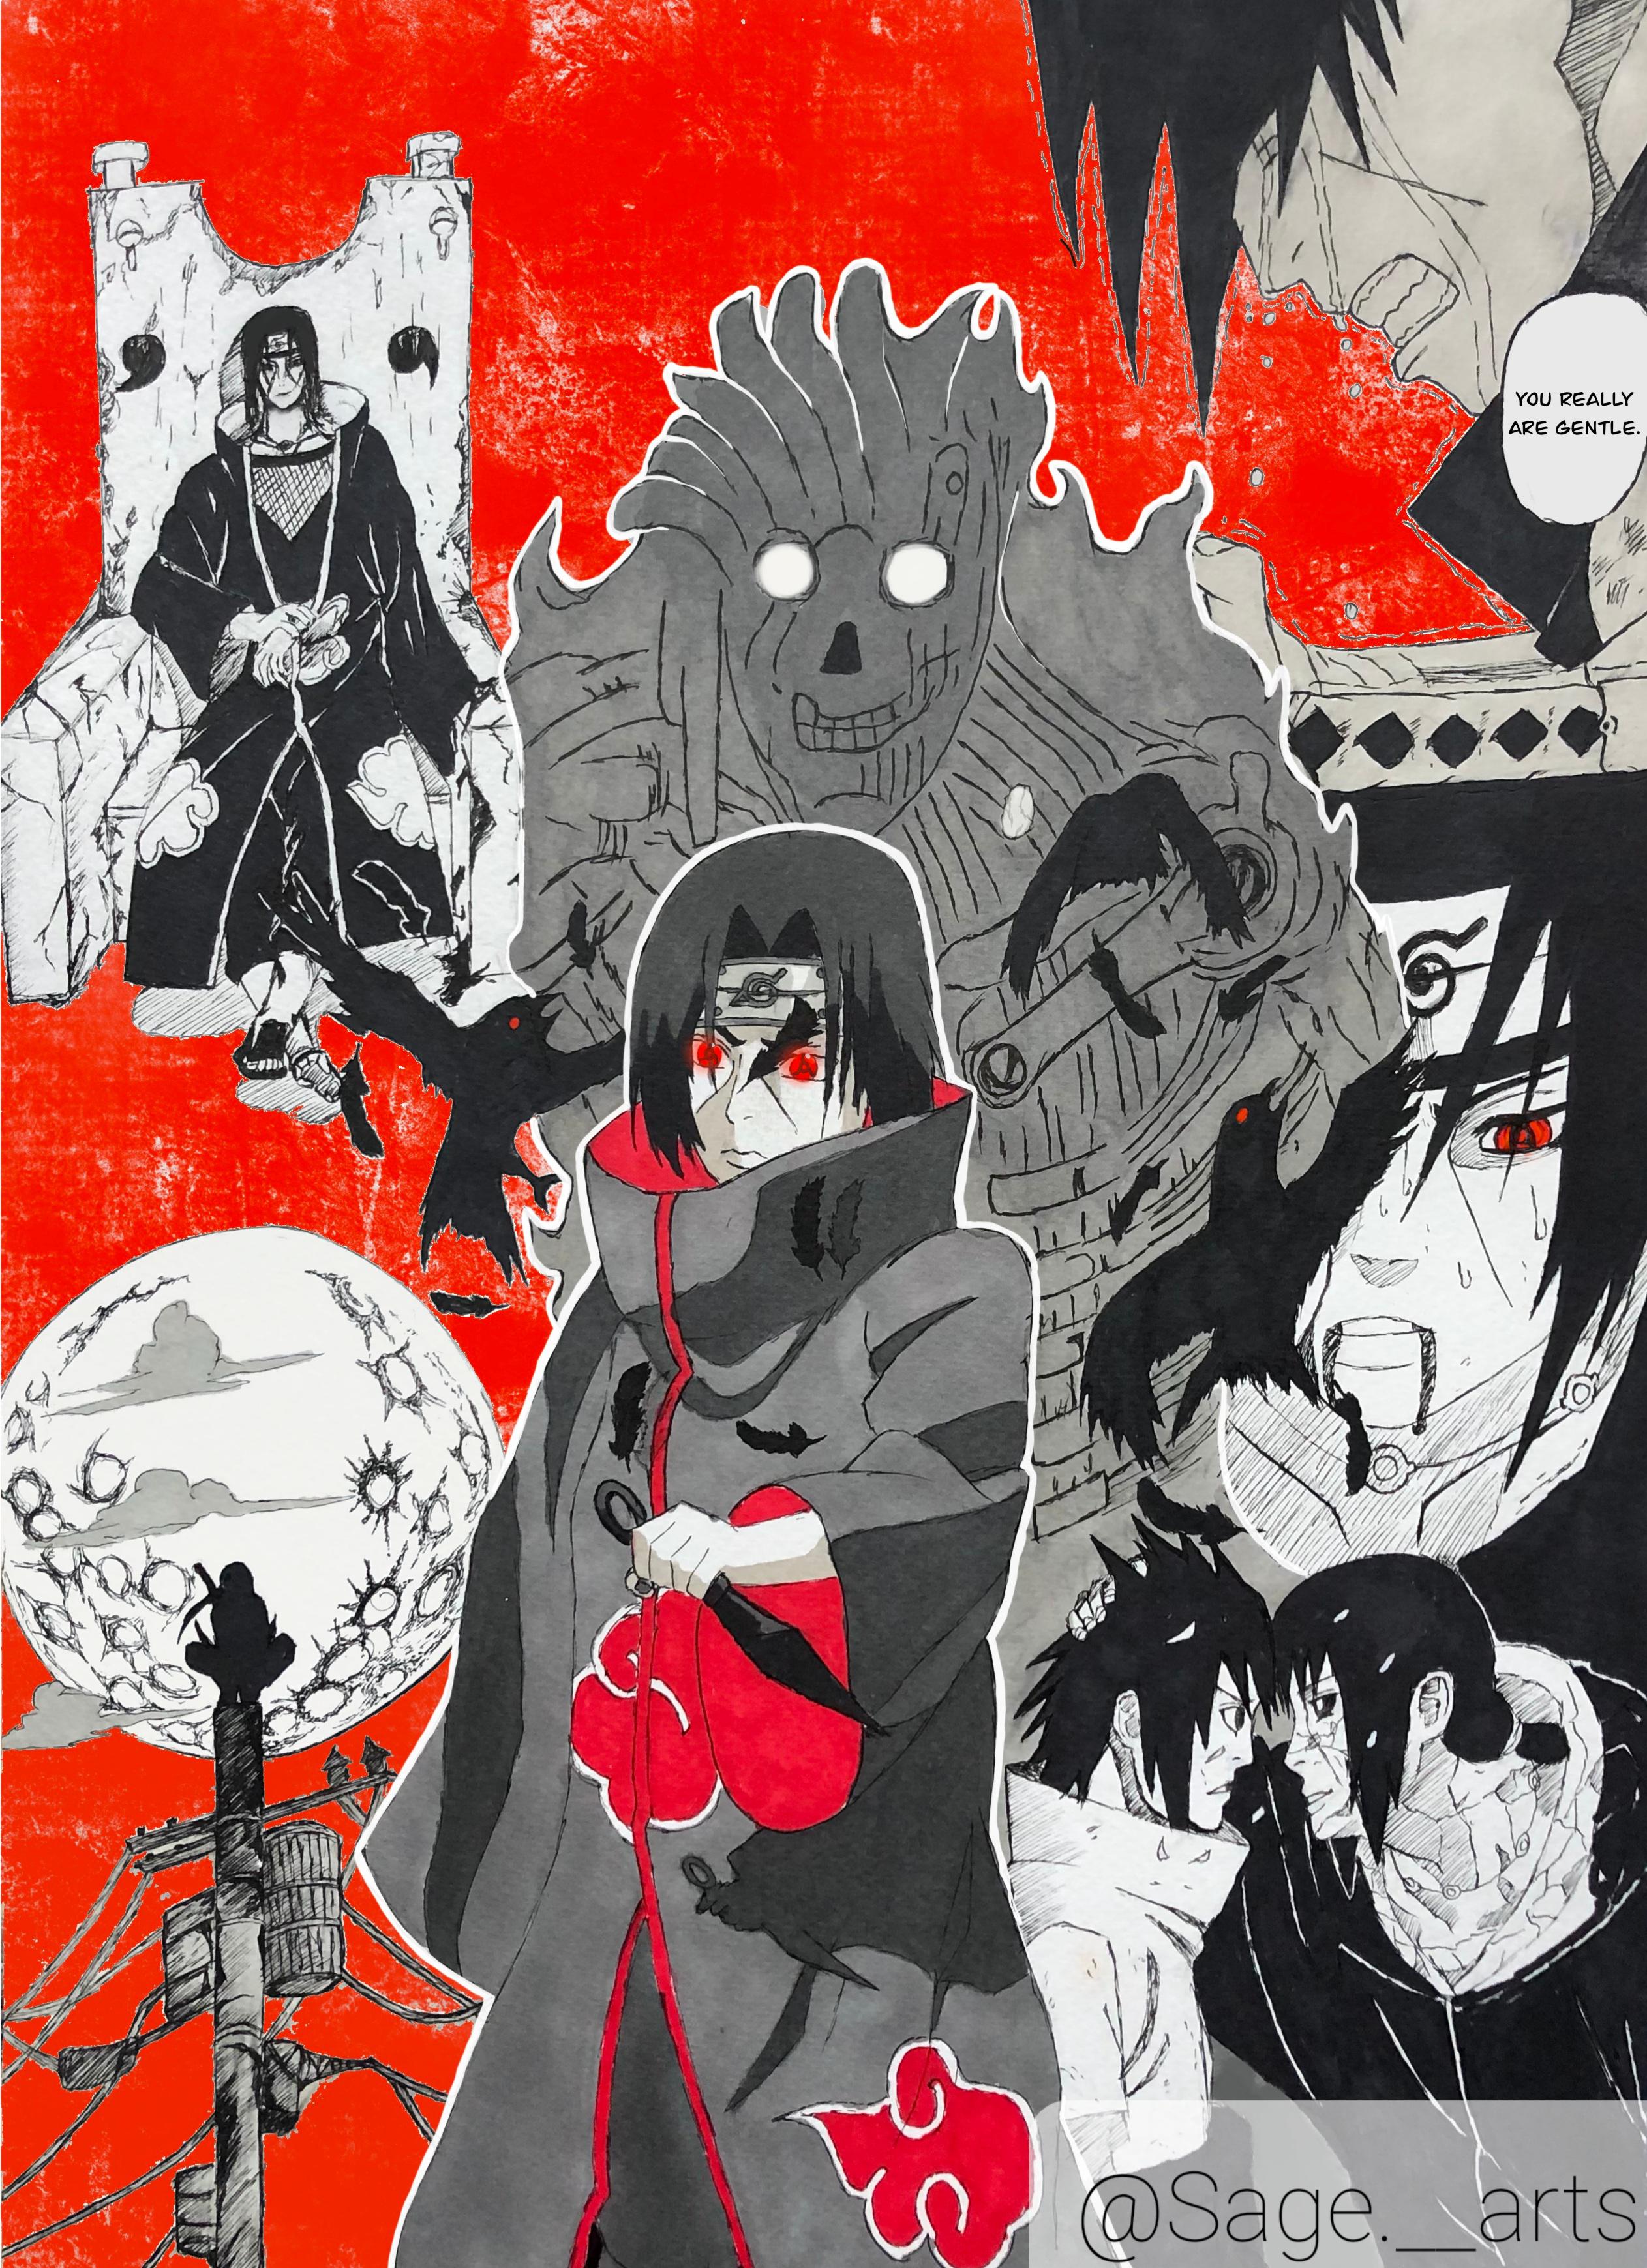 Itachi Uchiha, the greatest shinobi. This one took almost 10-12 hours to complete, it is drawn in A3 sheet plus I used Procreate. Hope you all like it. - Itachi Uchiha